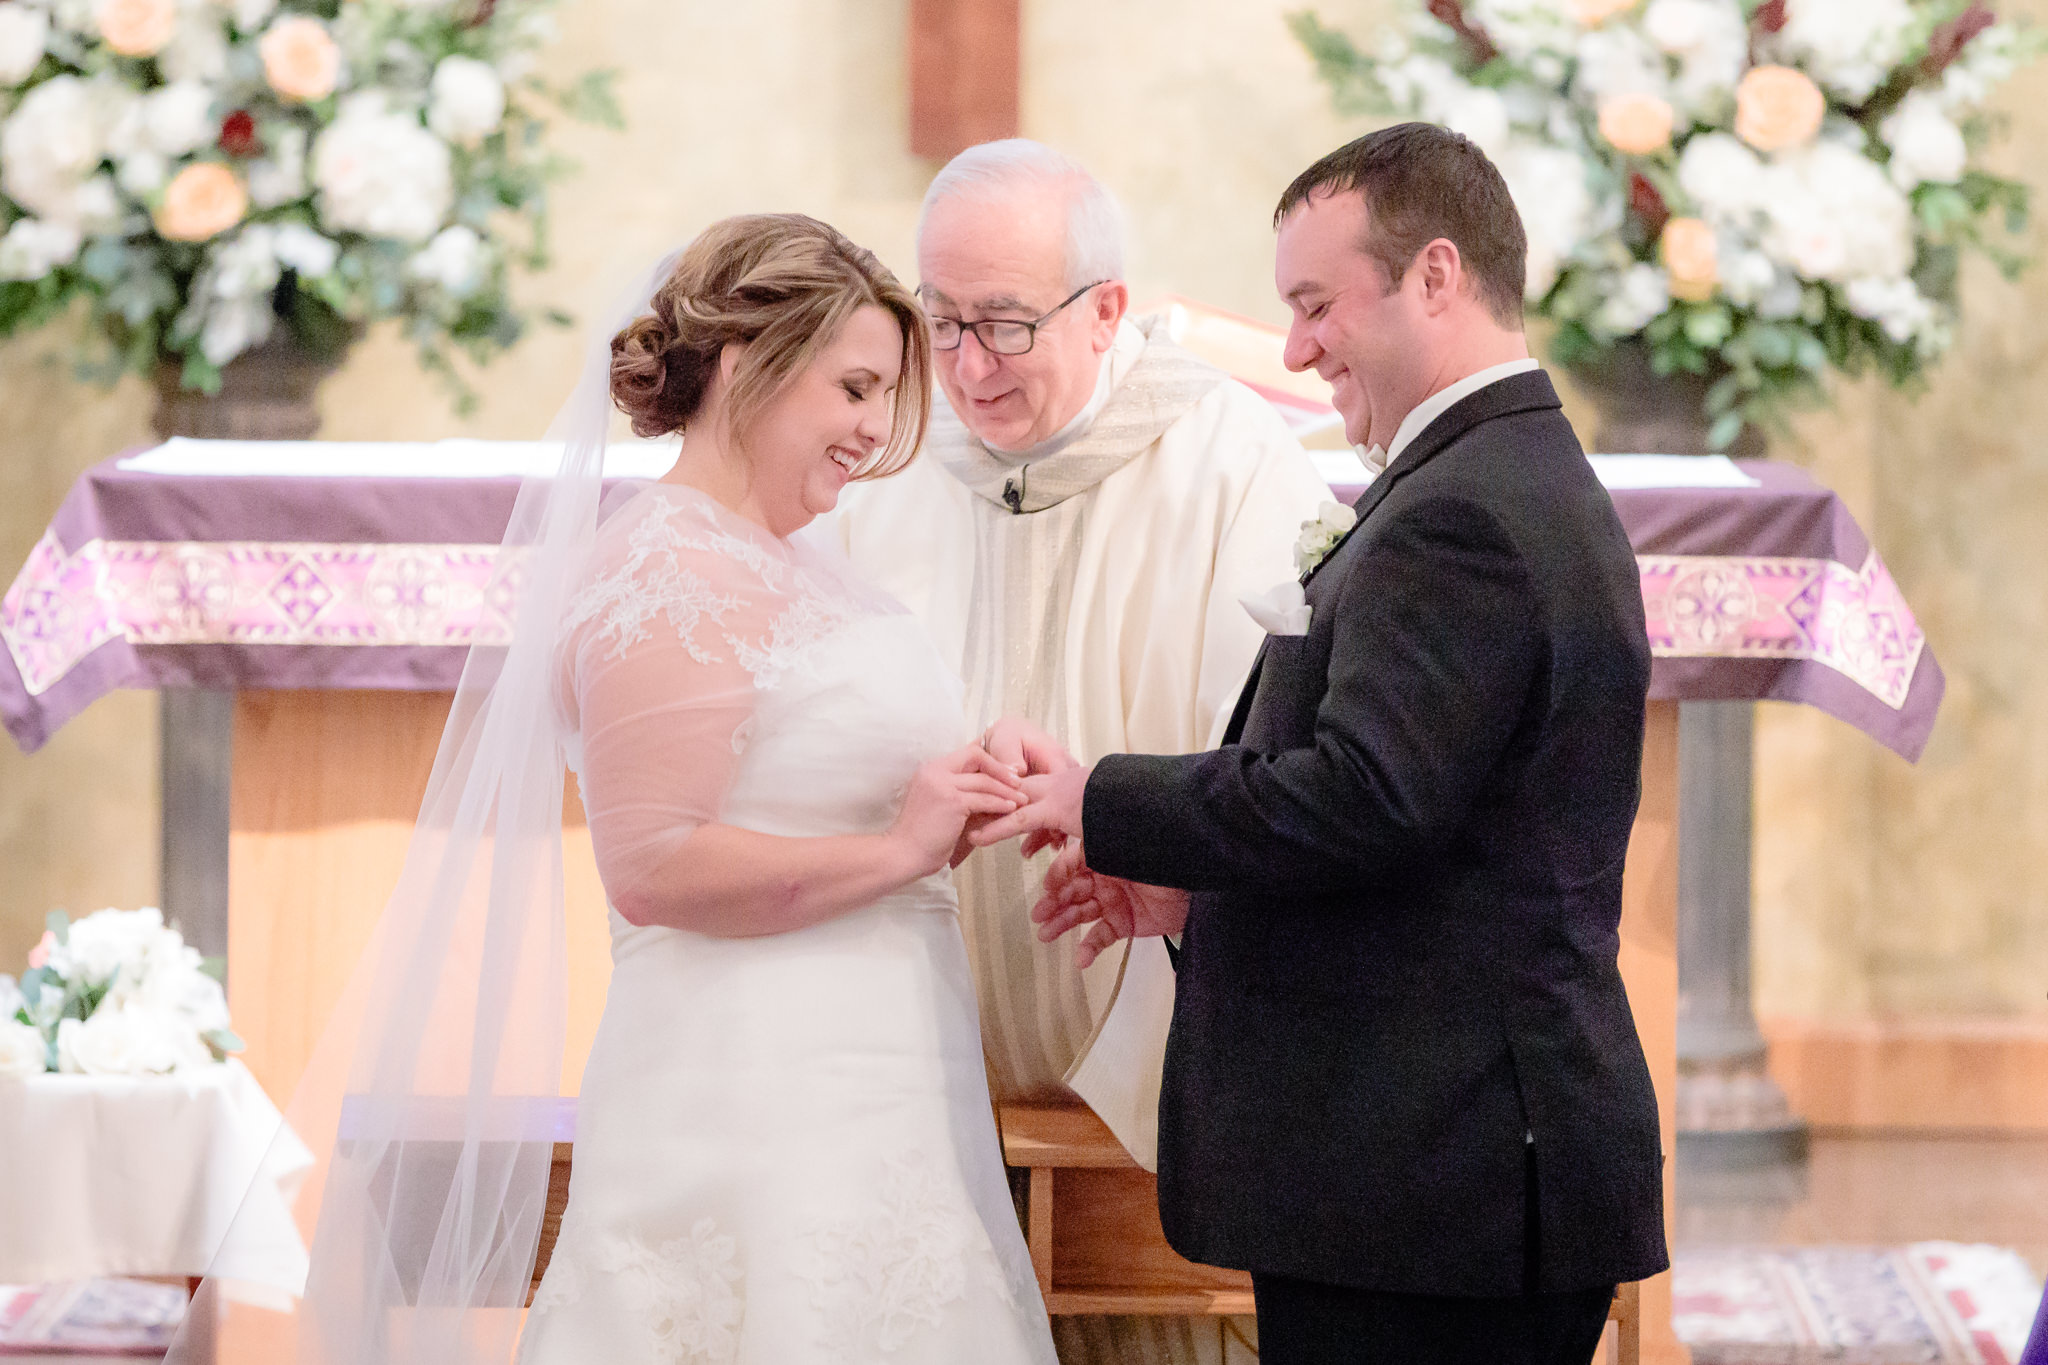 Bride puts groom's ring on his finger during a wedding ceremony at Mother of Sorrows Church